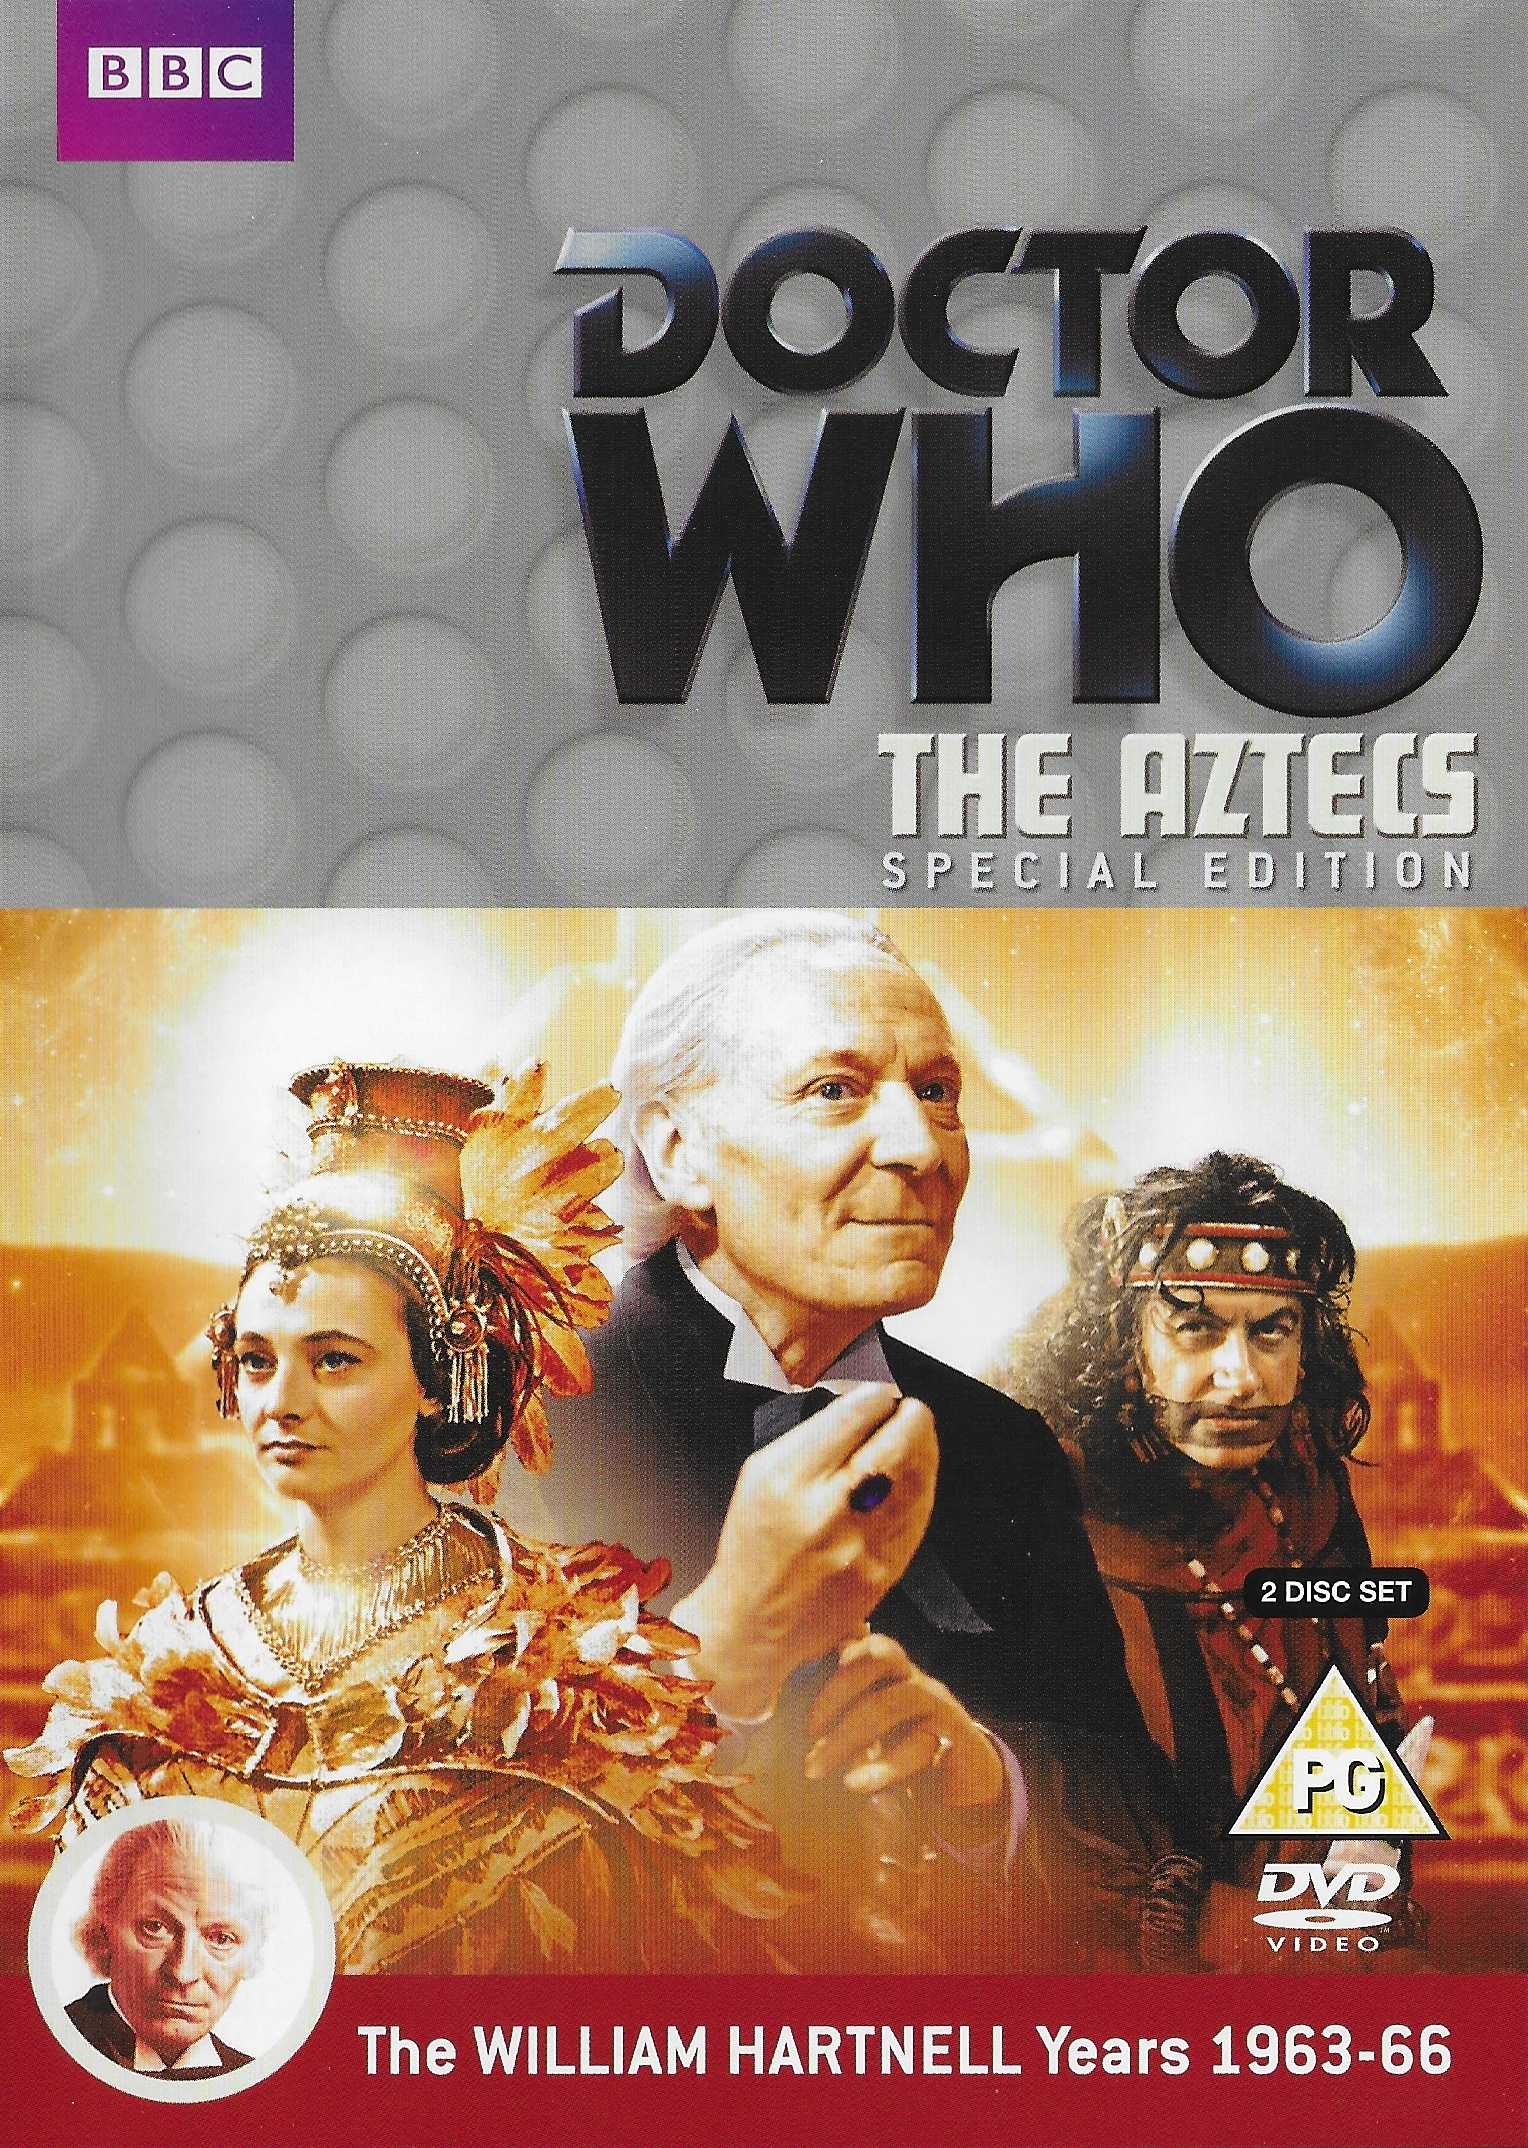 Picture of BBCDVD 3689 Doctor Who - The Aztecs by artist John Lucarotti from the BBC dvds - Records and Tapes library